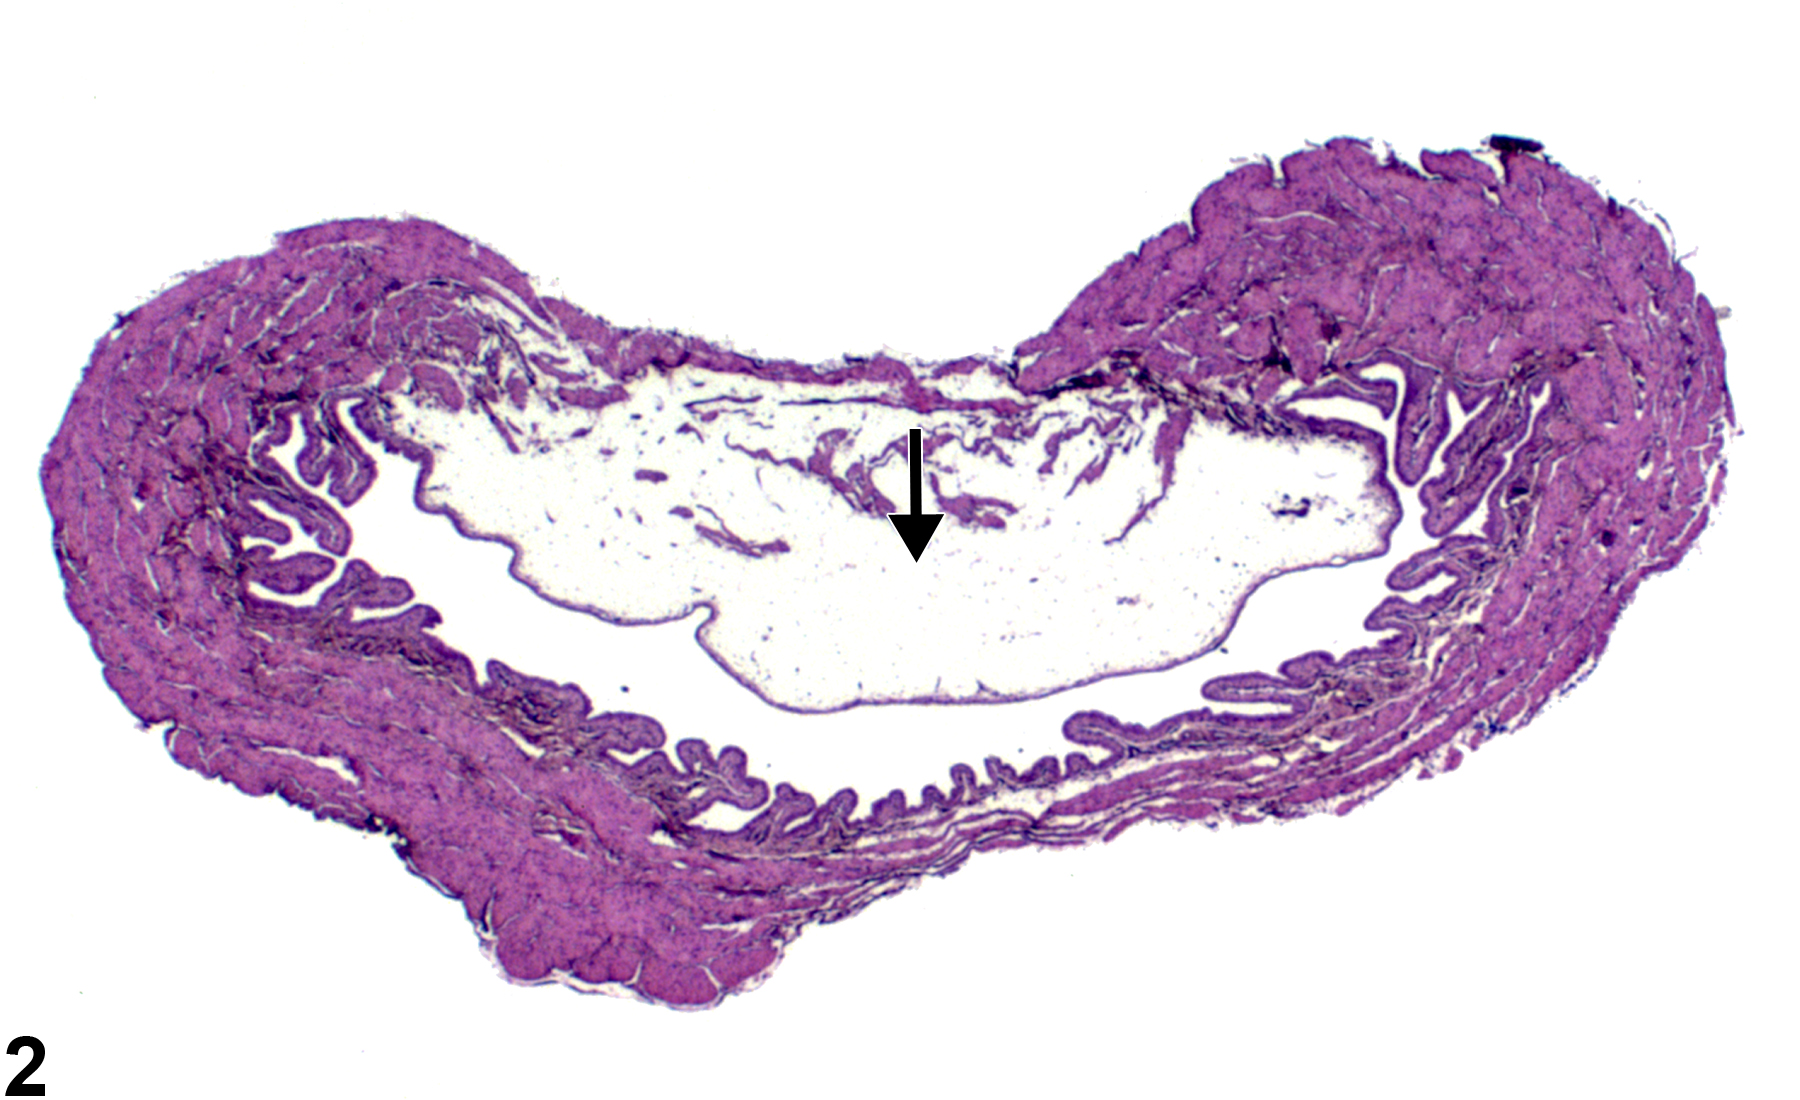 Image of edema in the urinary bladder from a female F344/N rat in an acute study